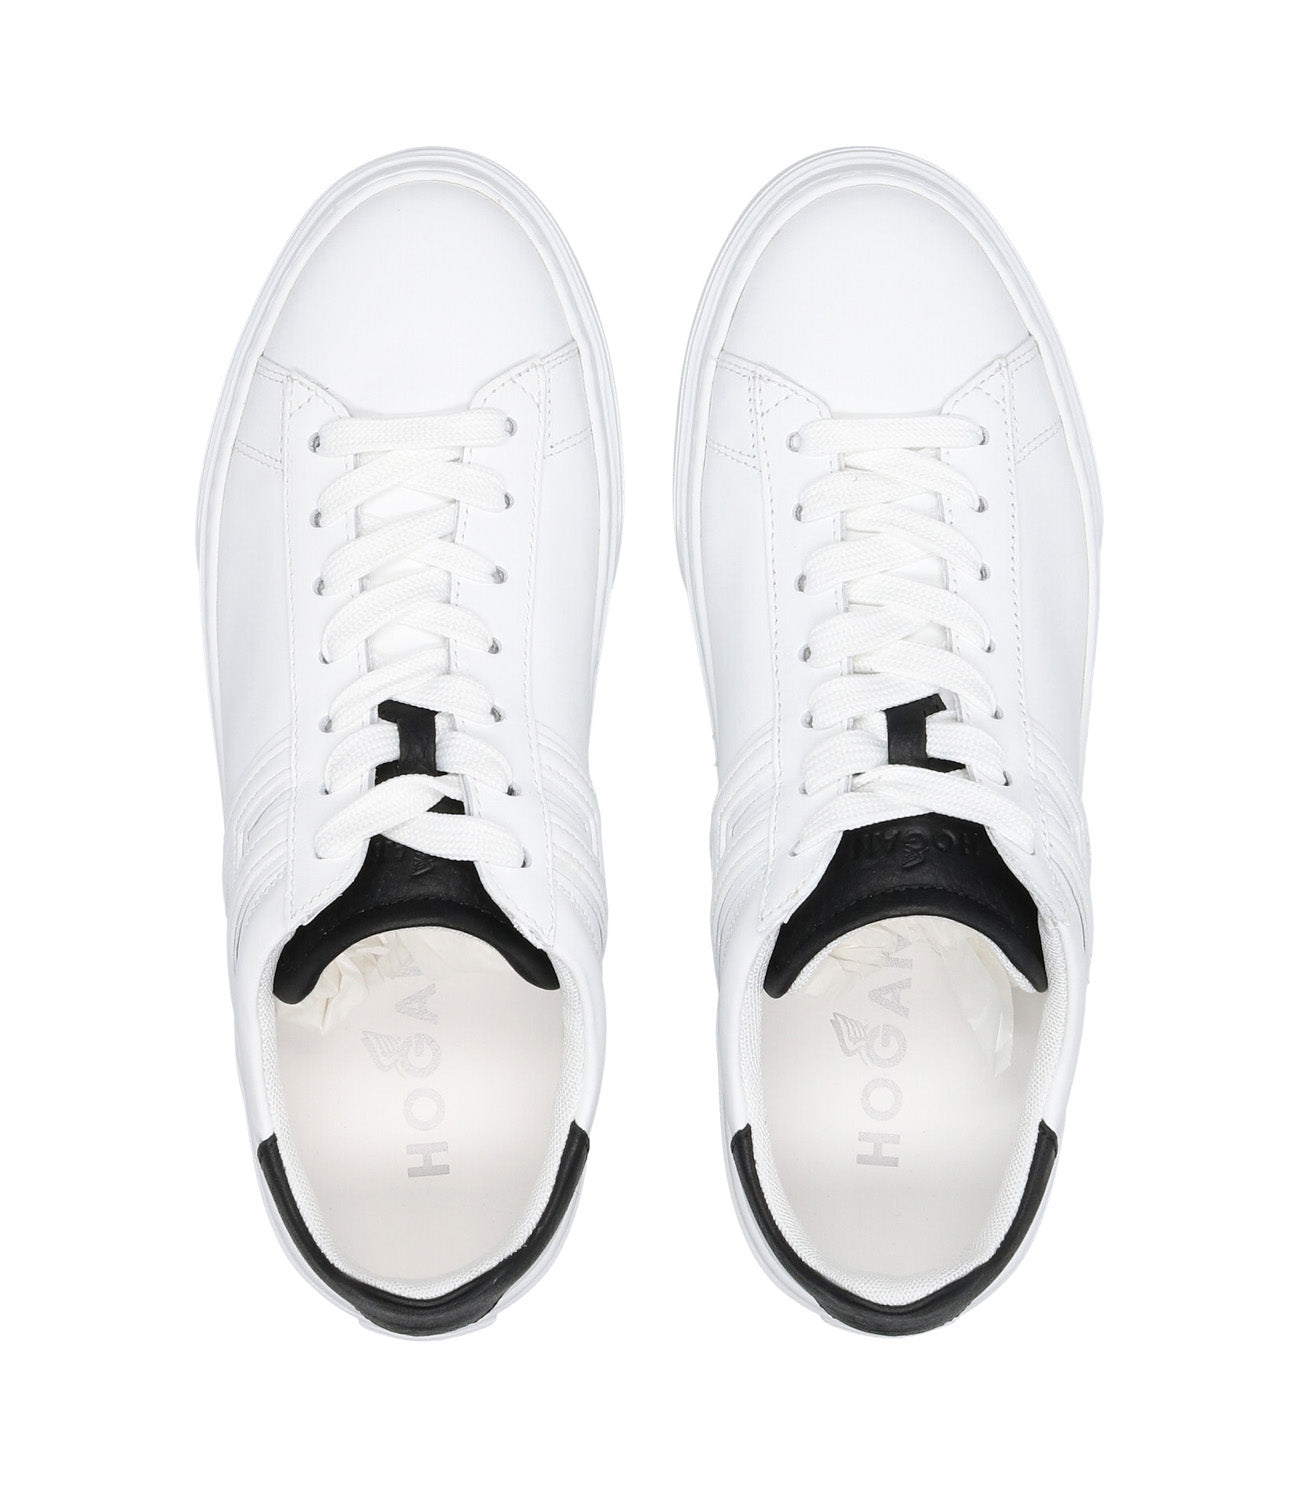 Hogan | H365 White and Black Sneakers